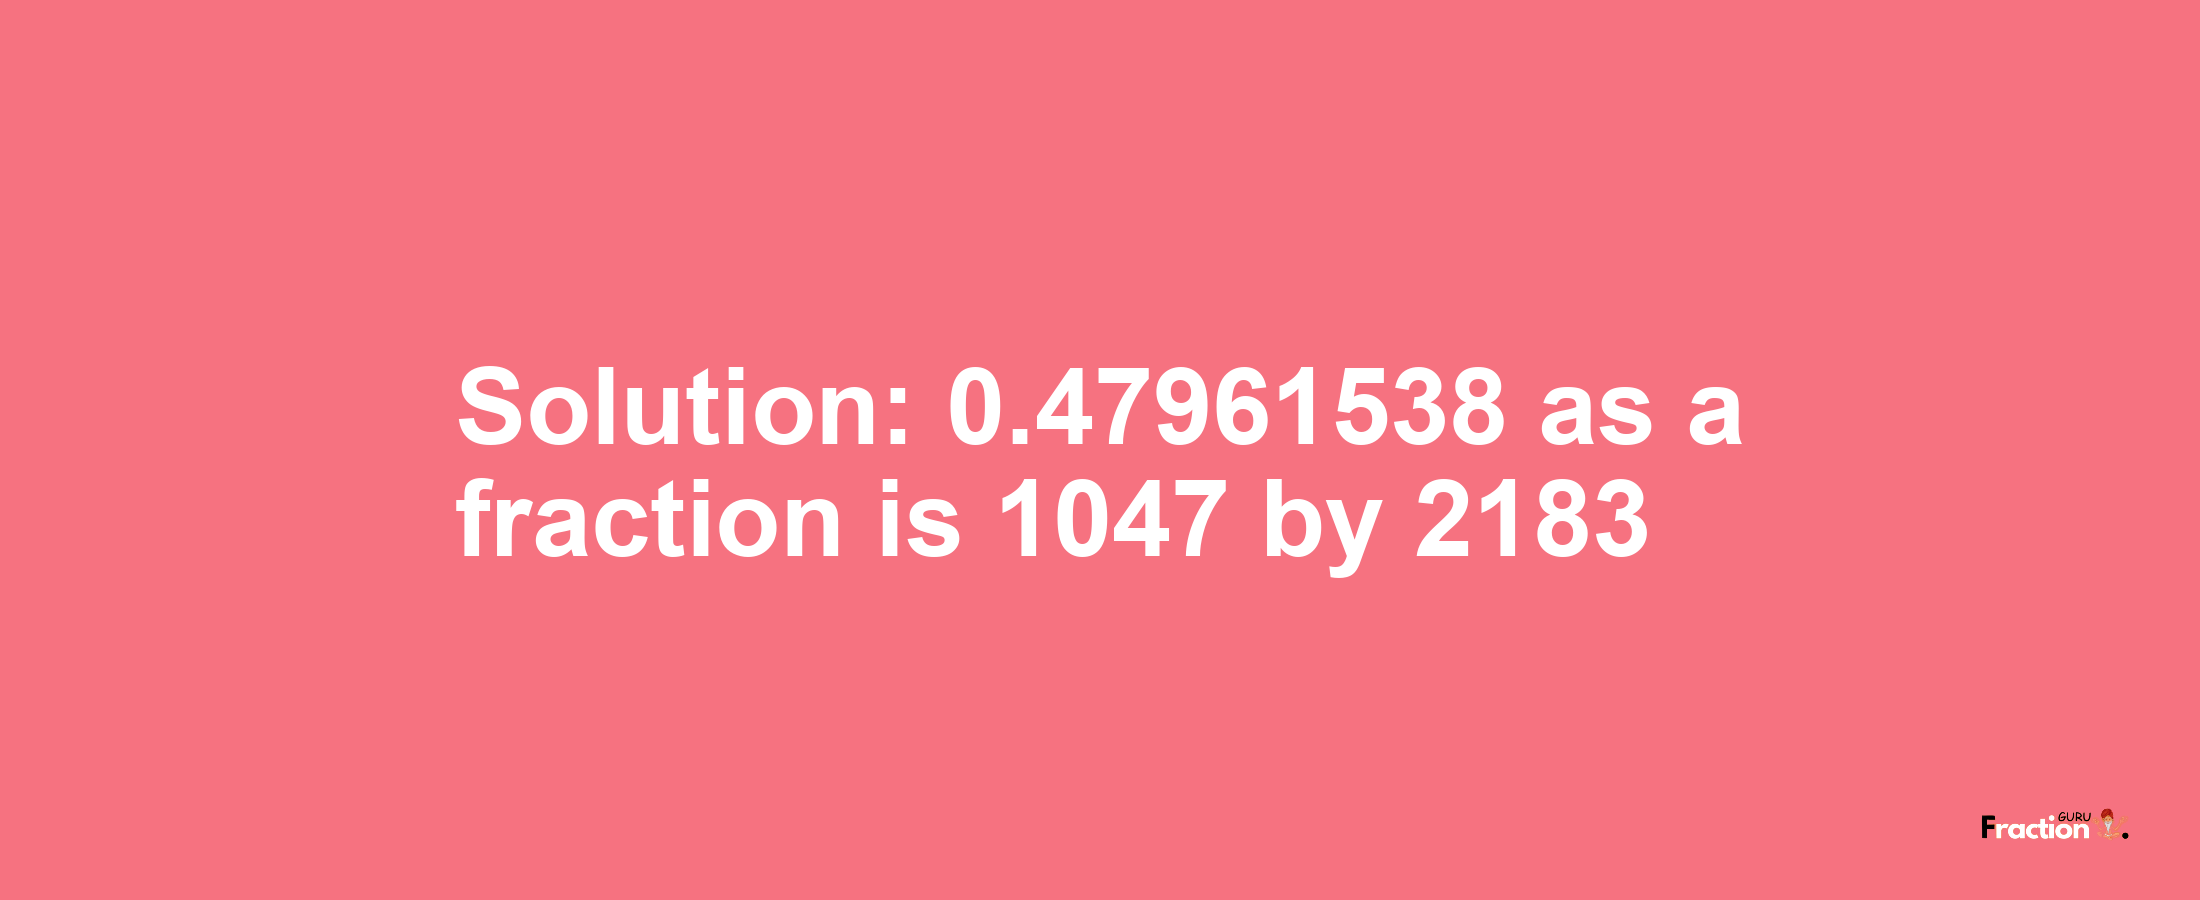 Solution:0.47961538 as a fraction is 1047/2183